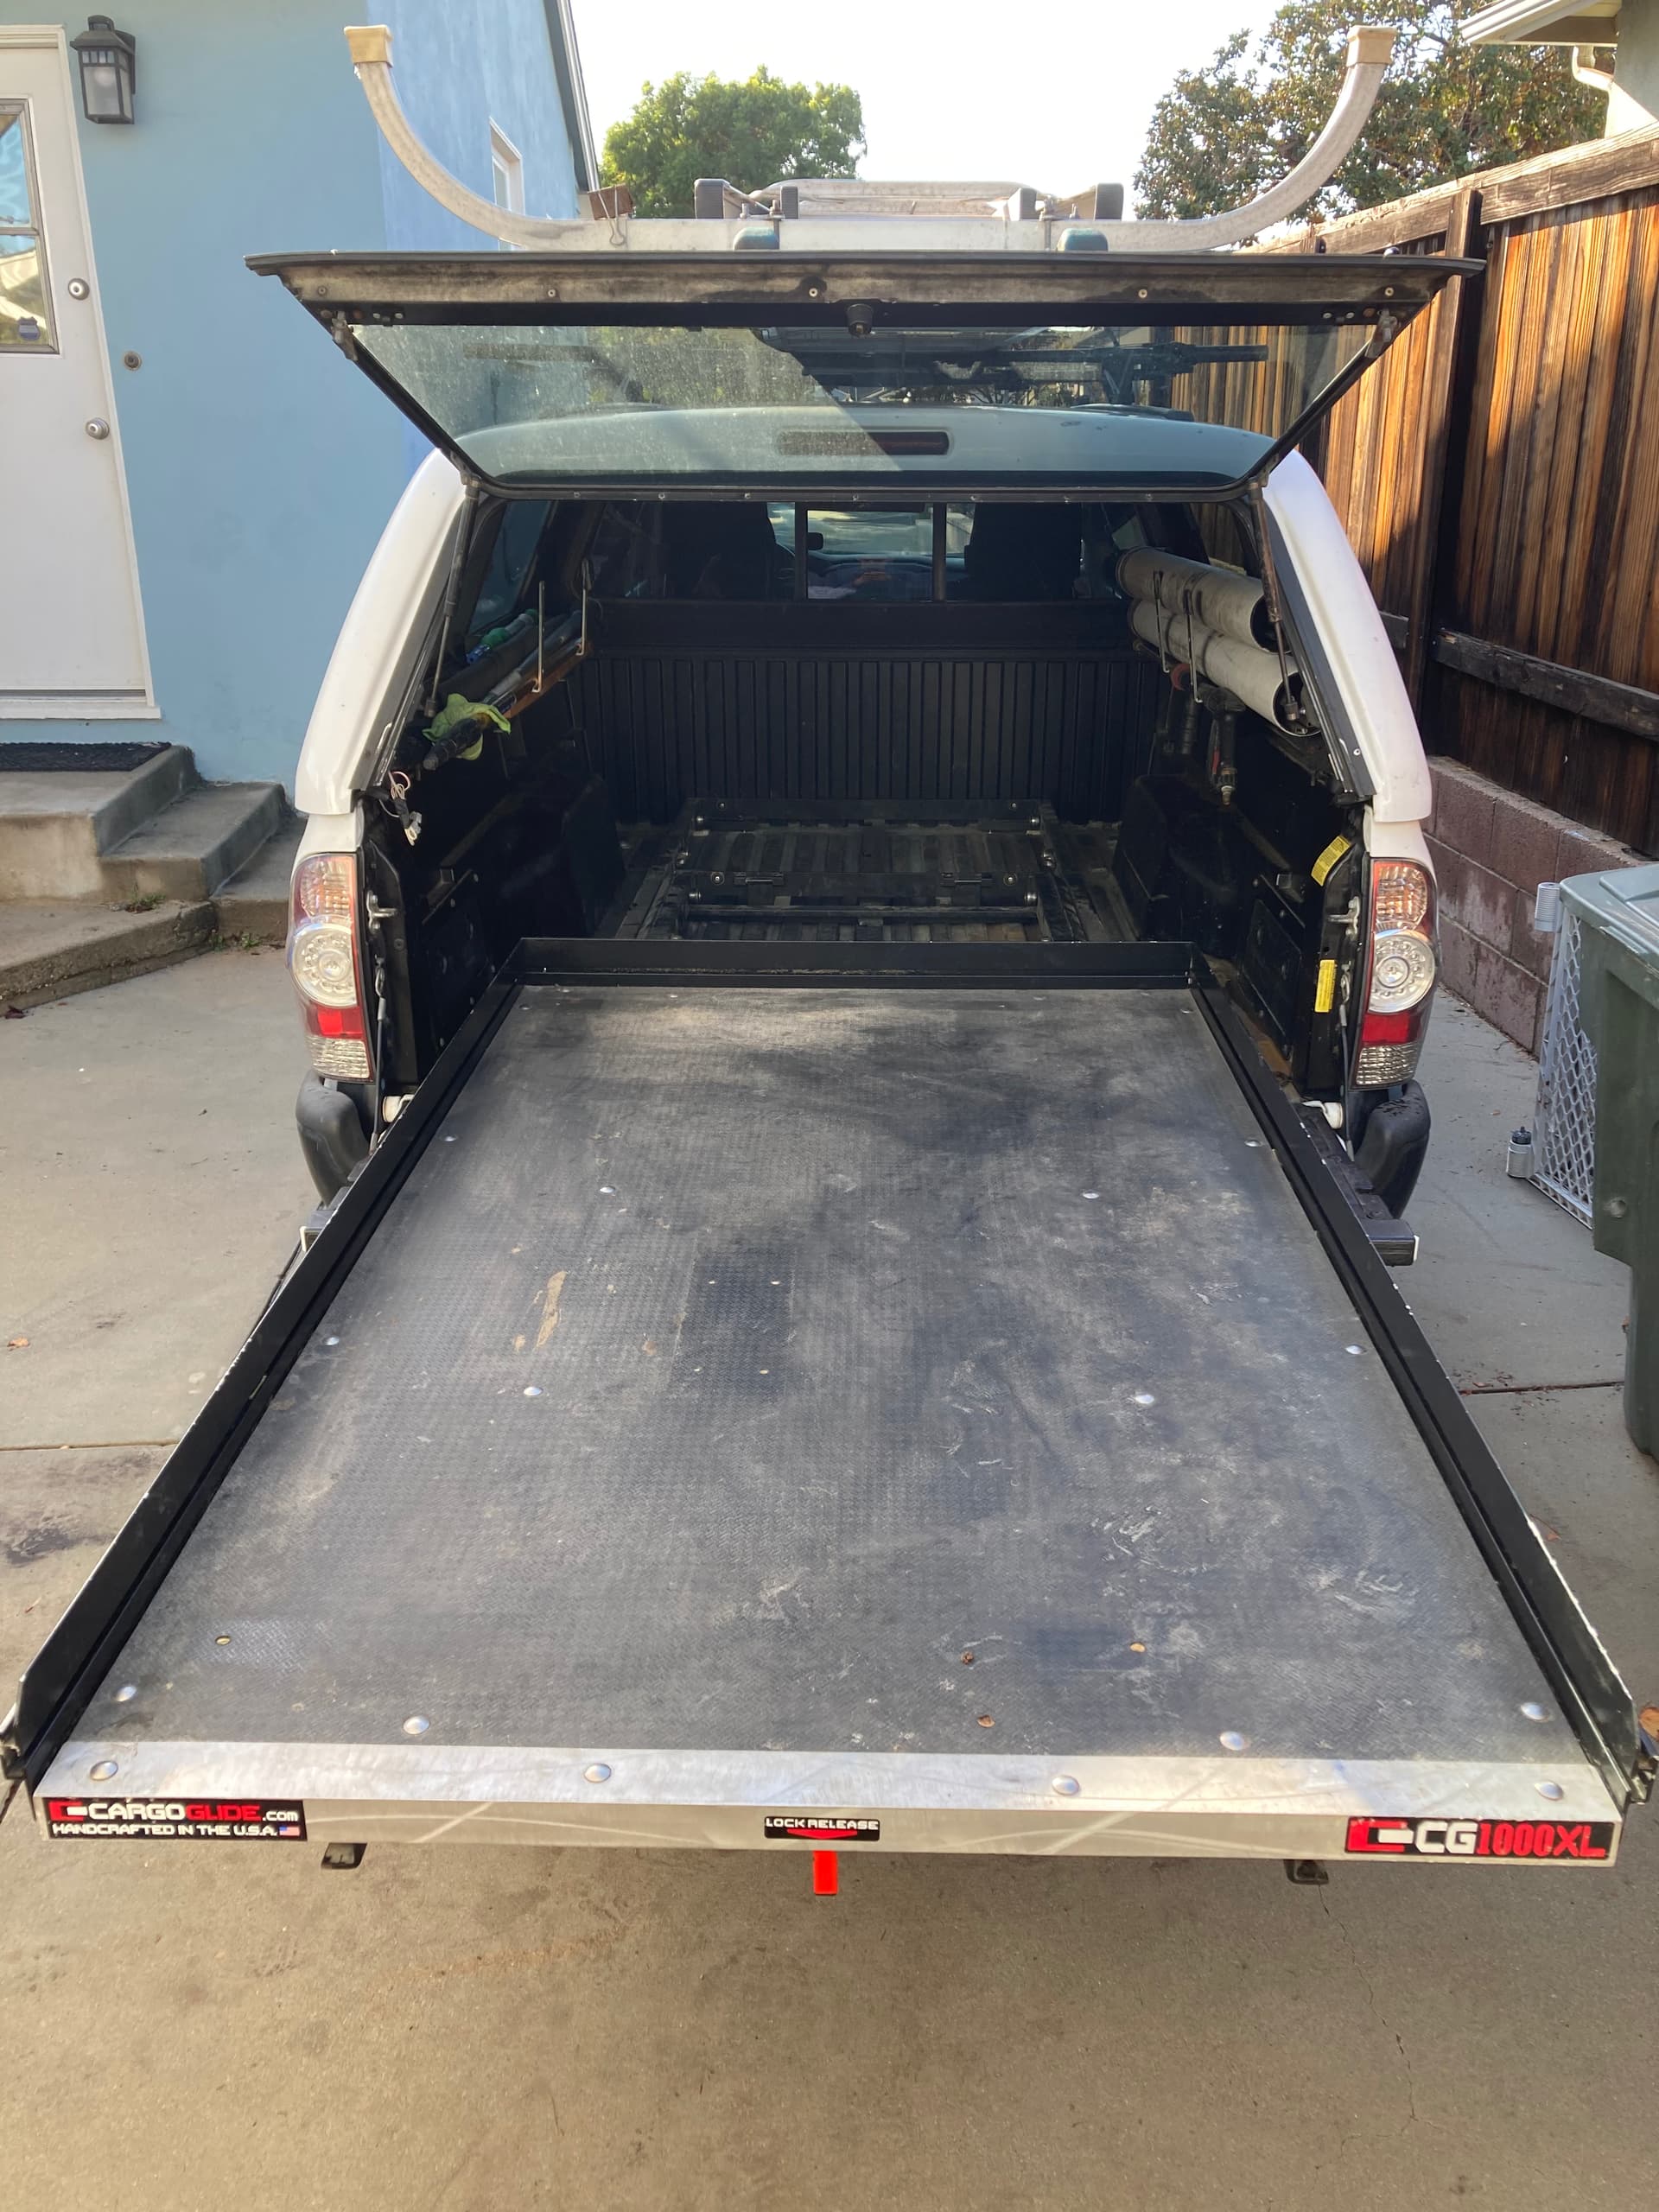 Truck Bed Slide - The Garage - Window Cleaning Resource